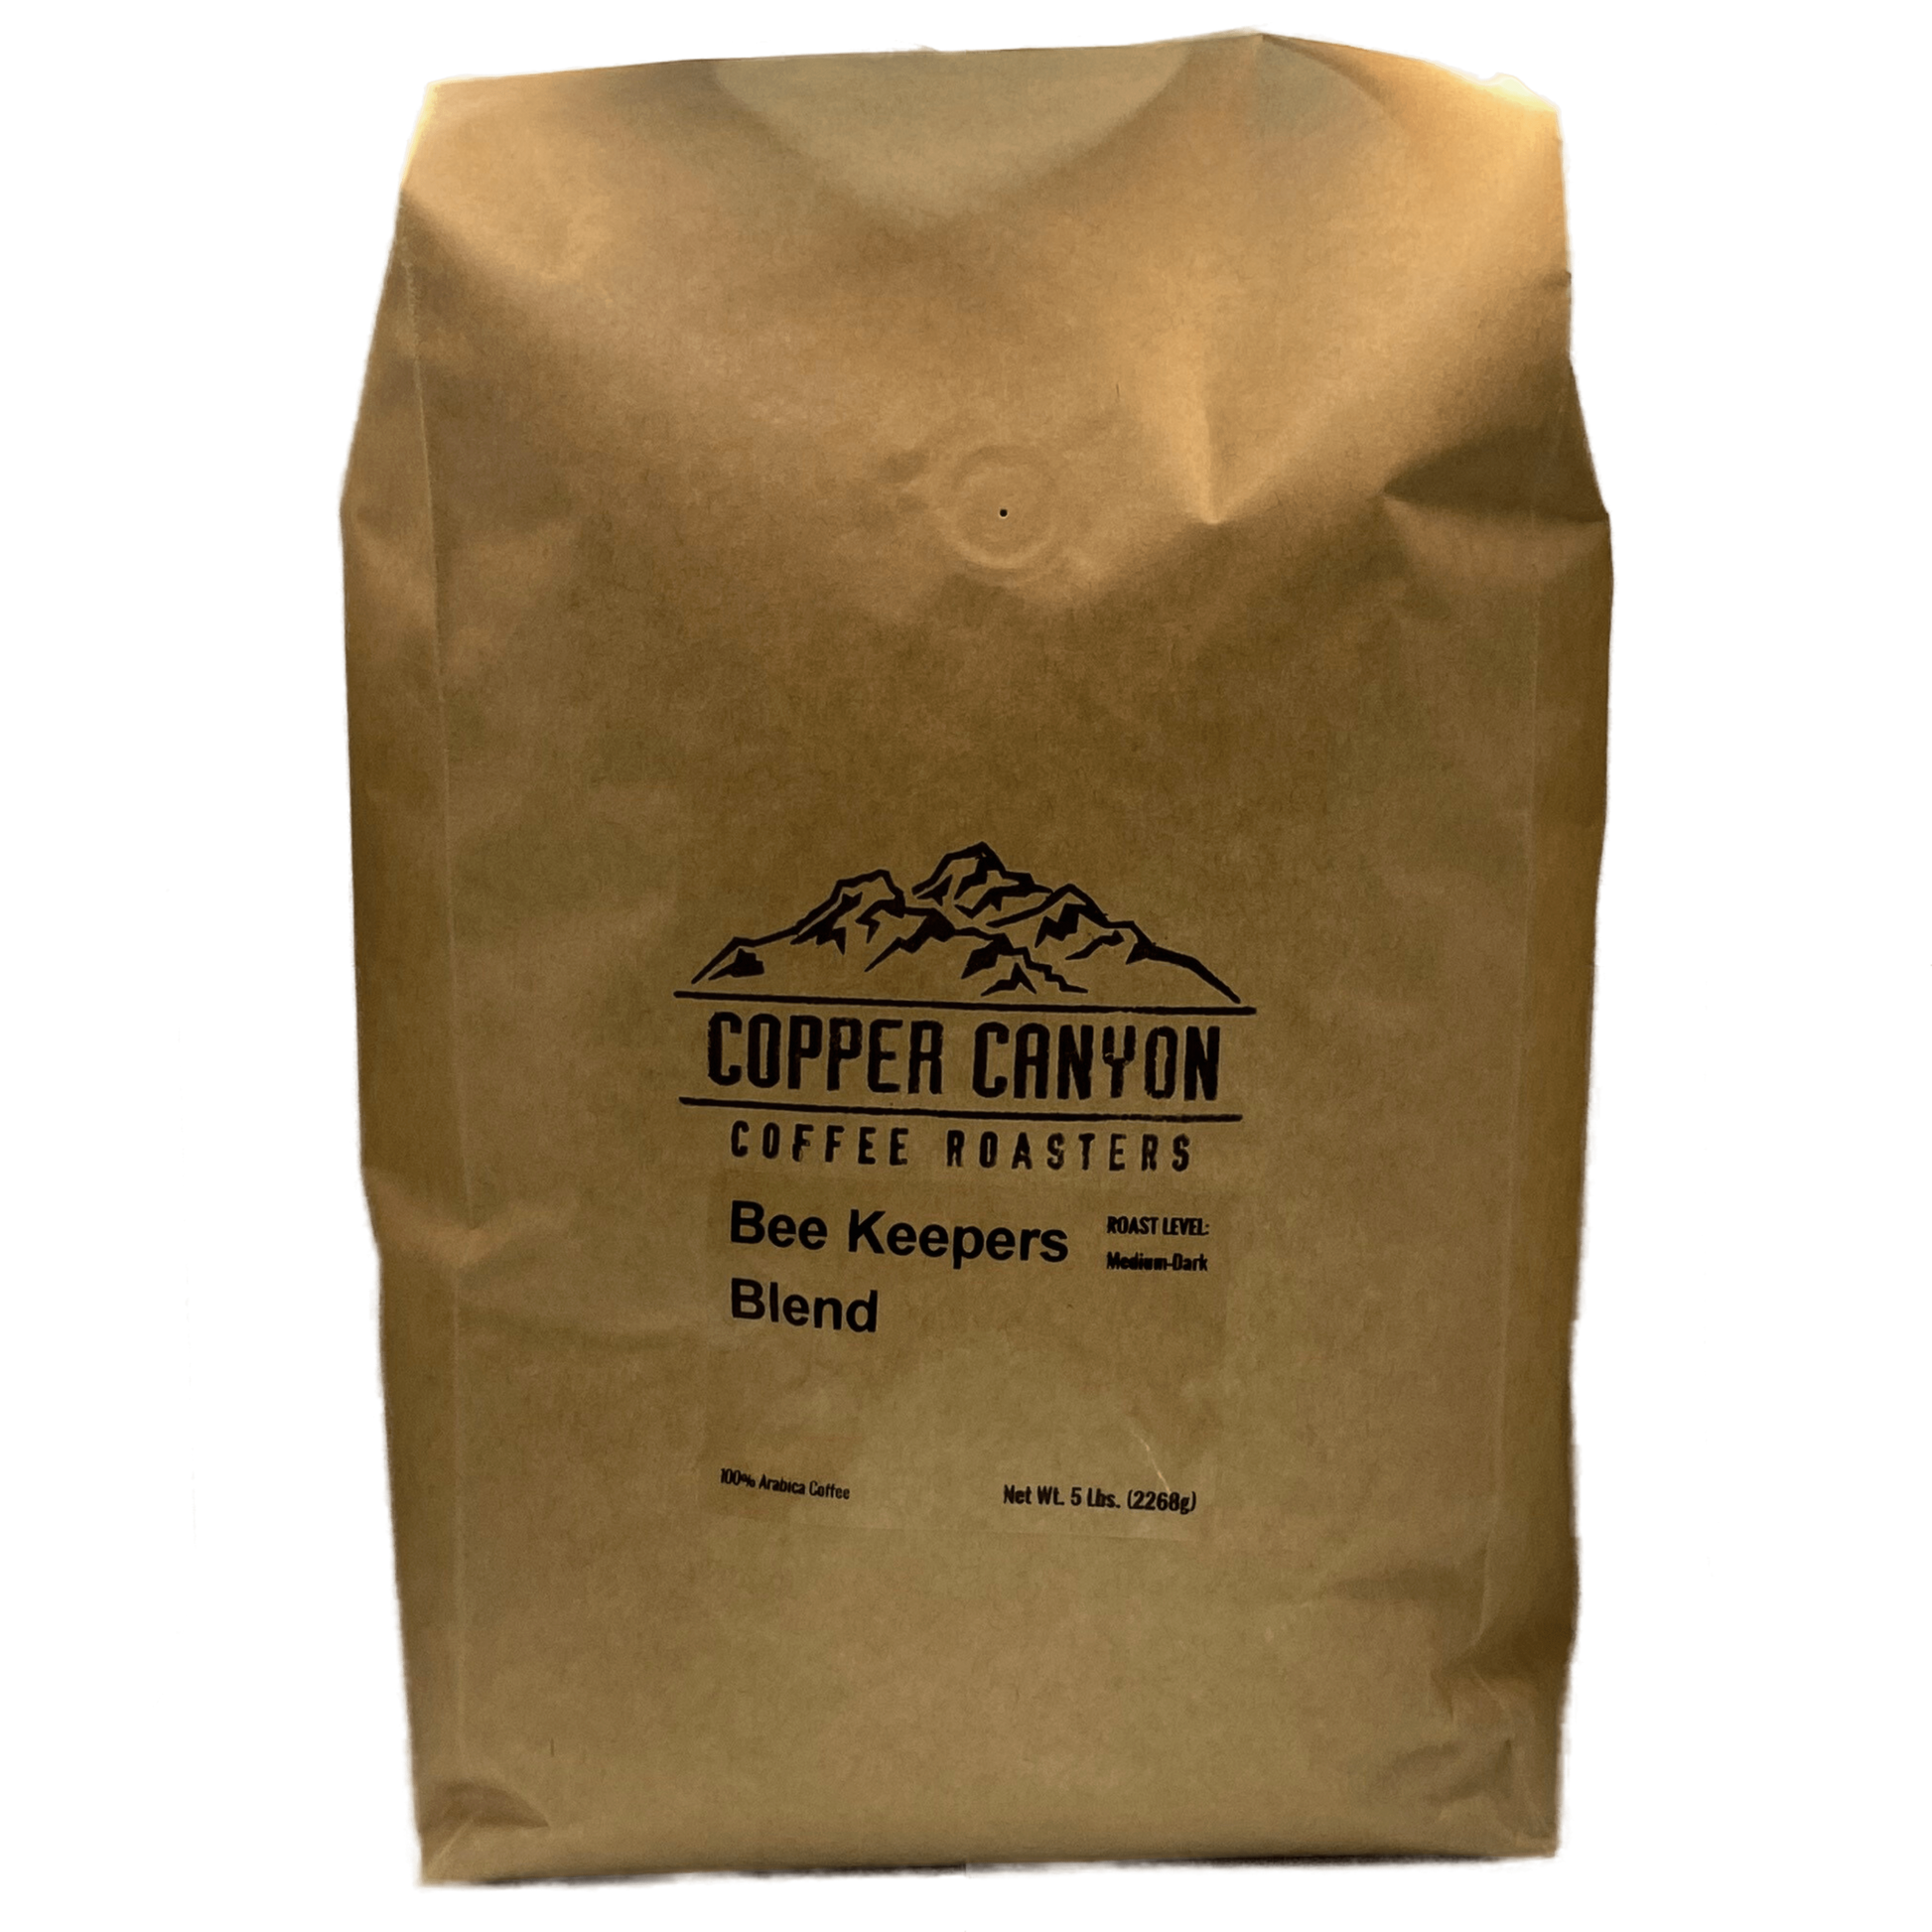 5 pound bag of Beekeeper's Blend dark roast coffee by Copper Canyon